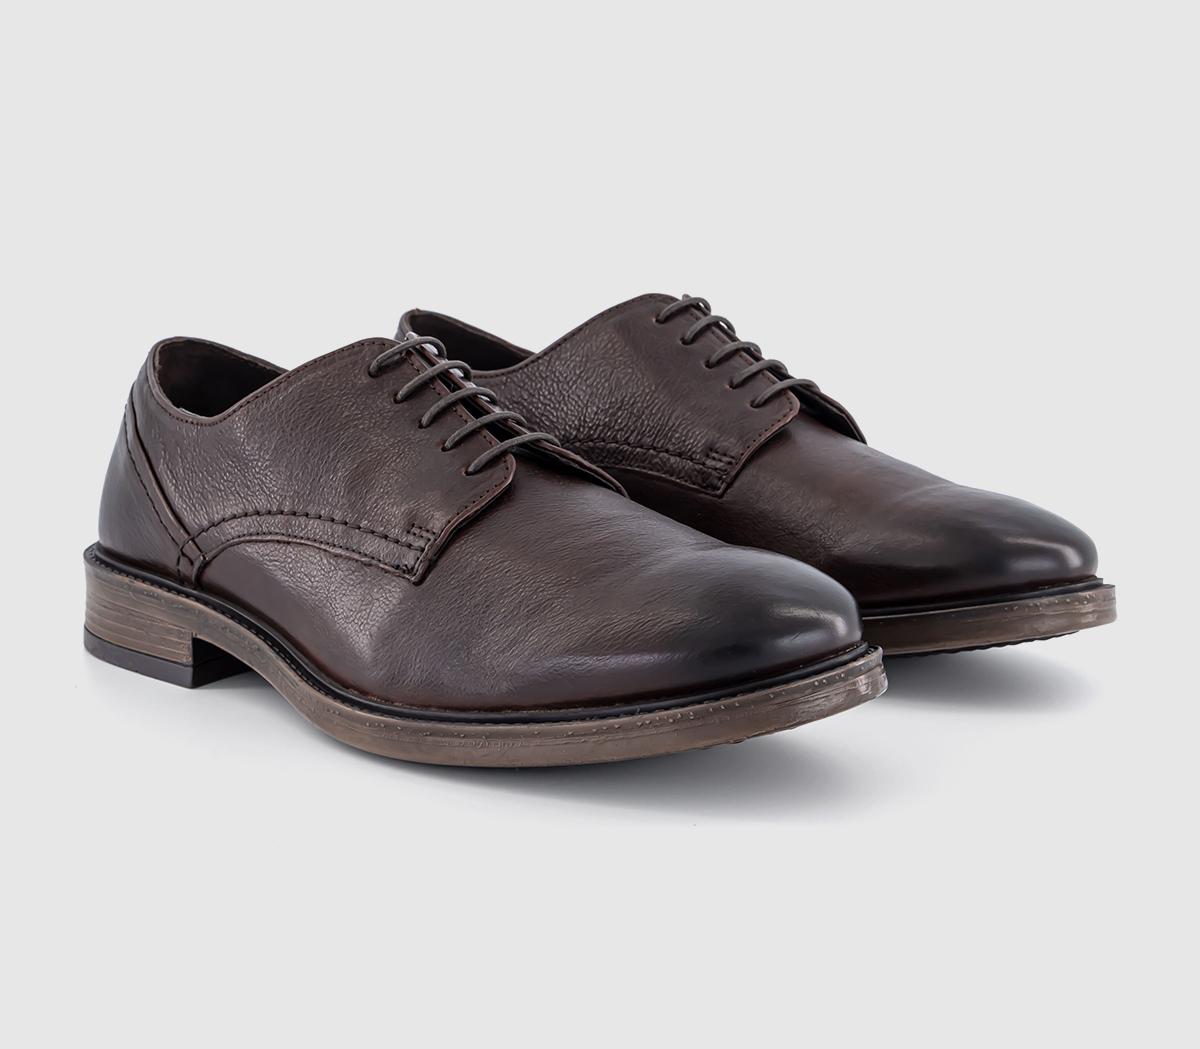 OFFICE Cadeleigh Casual Leather Derby Shoes Brown, 9